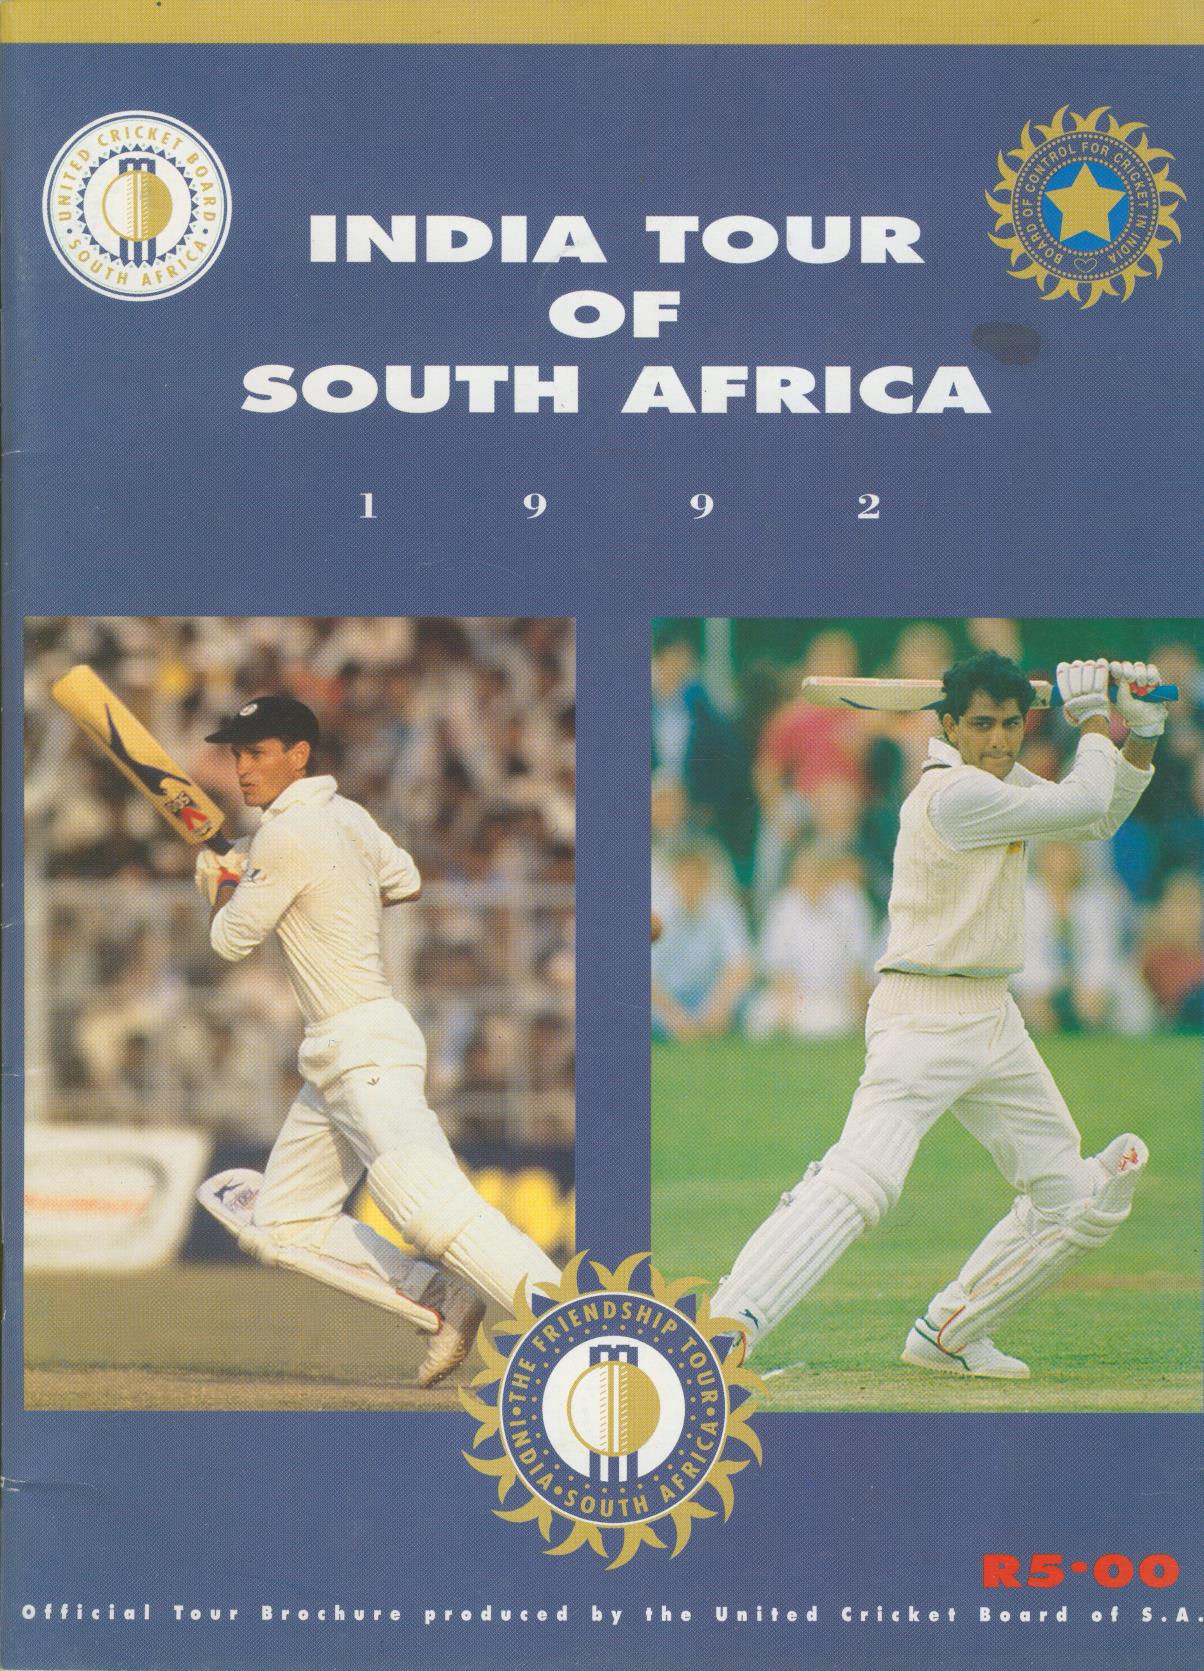 1993 india tour of south africa